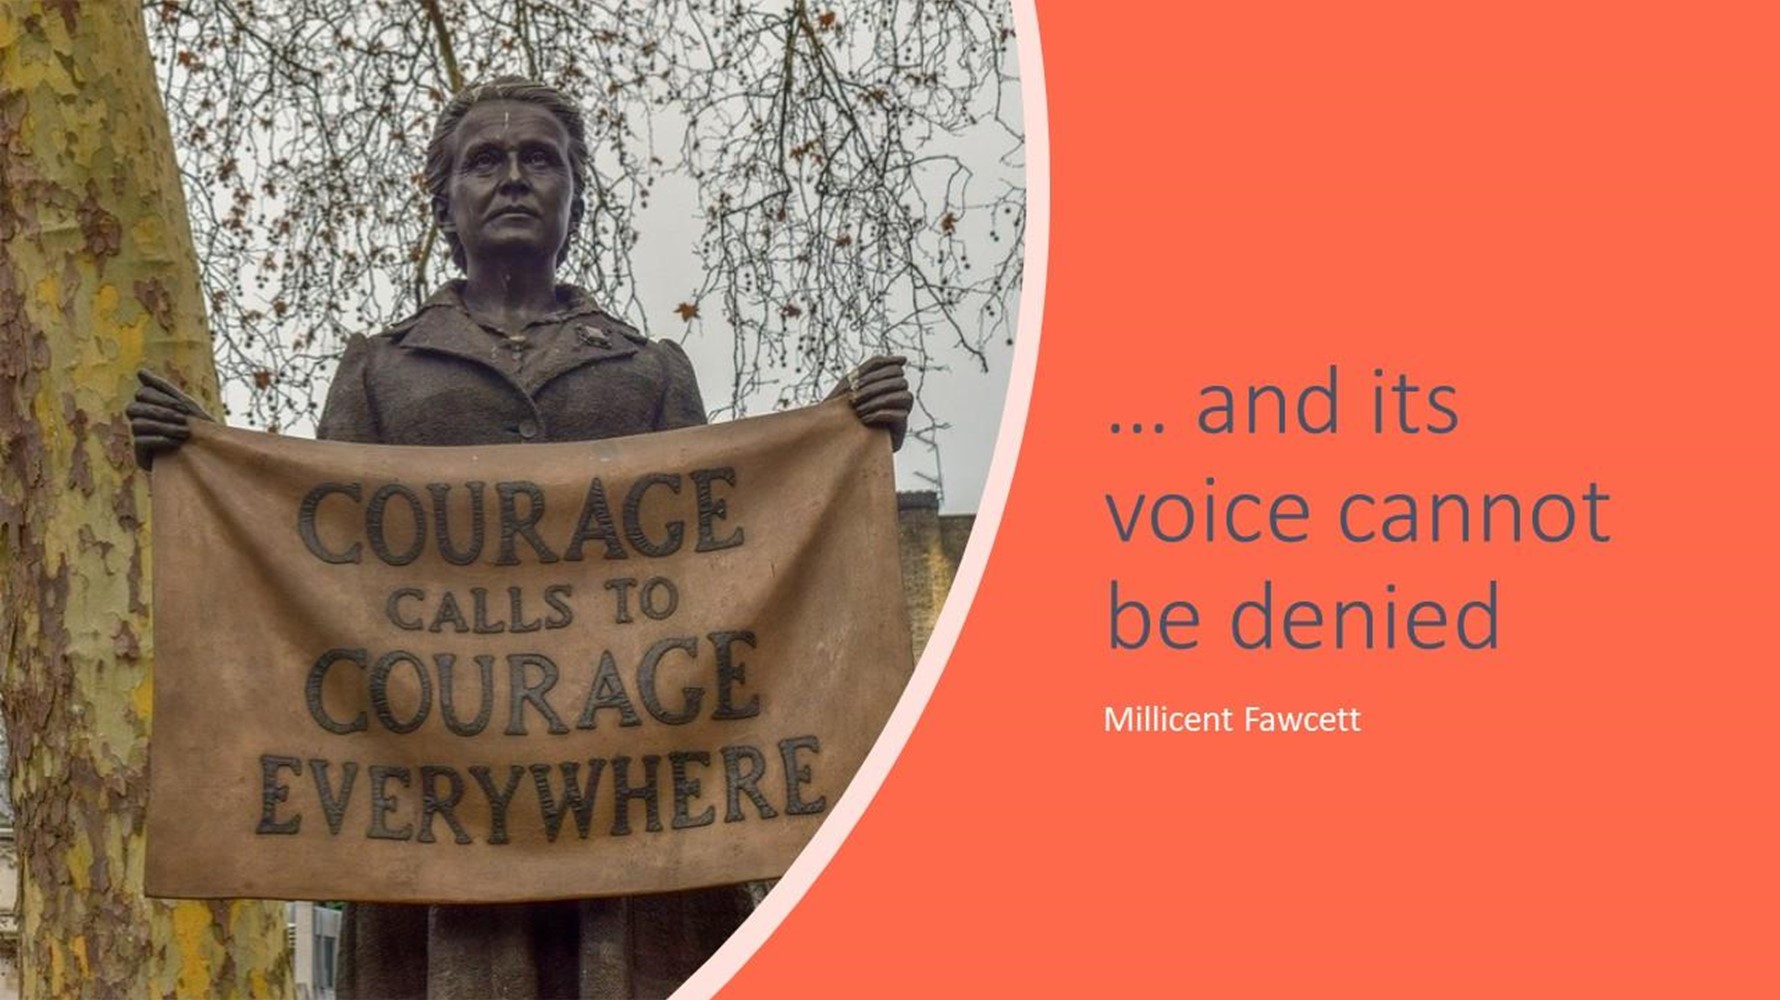 Courage calls to courage everywhere... and its voice cannot be denied - Millicent Fawcett